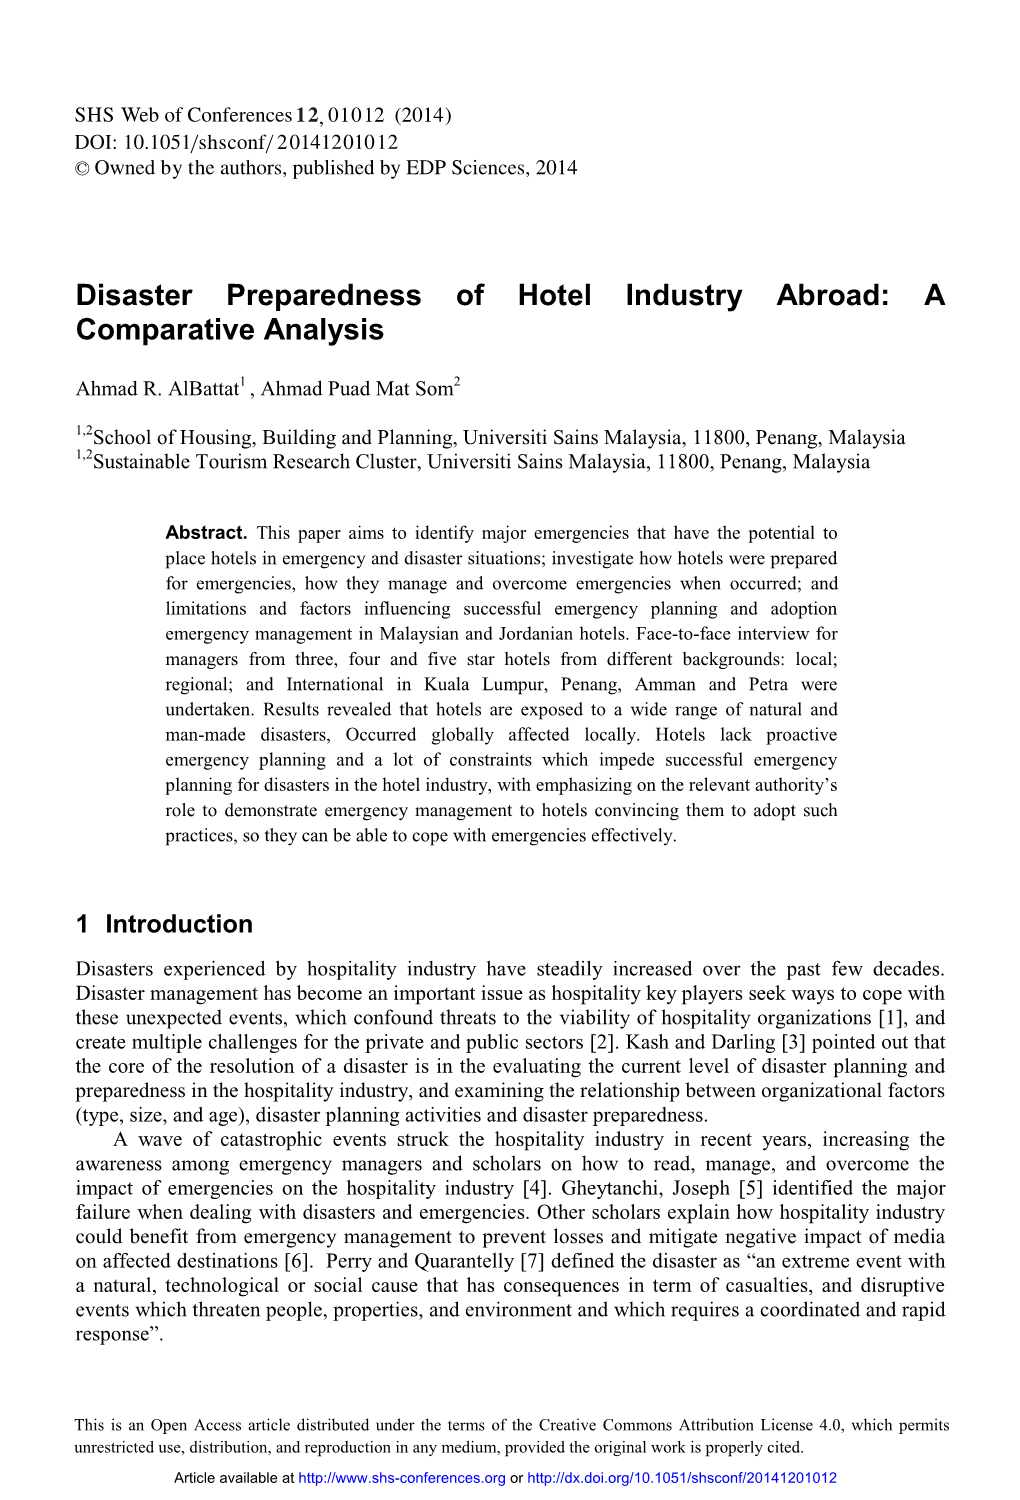 Disaster Preparedness of Hotel Industry Abroad: a Comparative Analysis